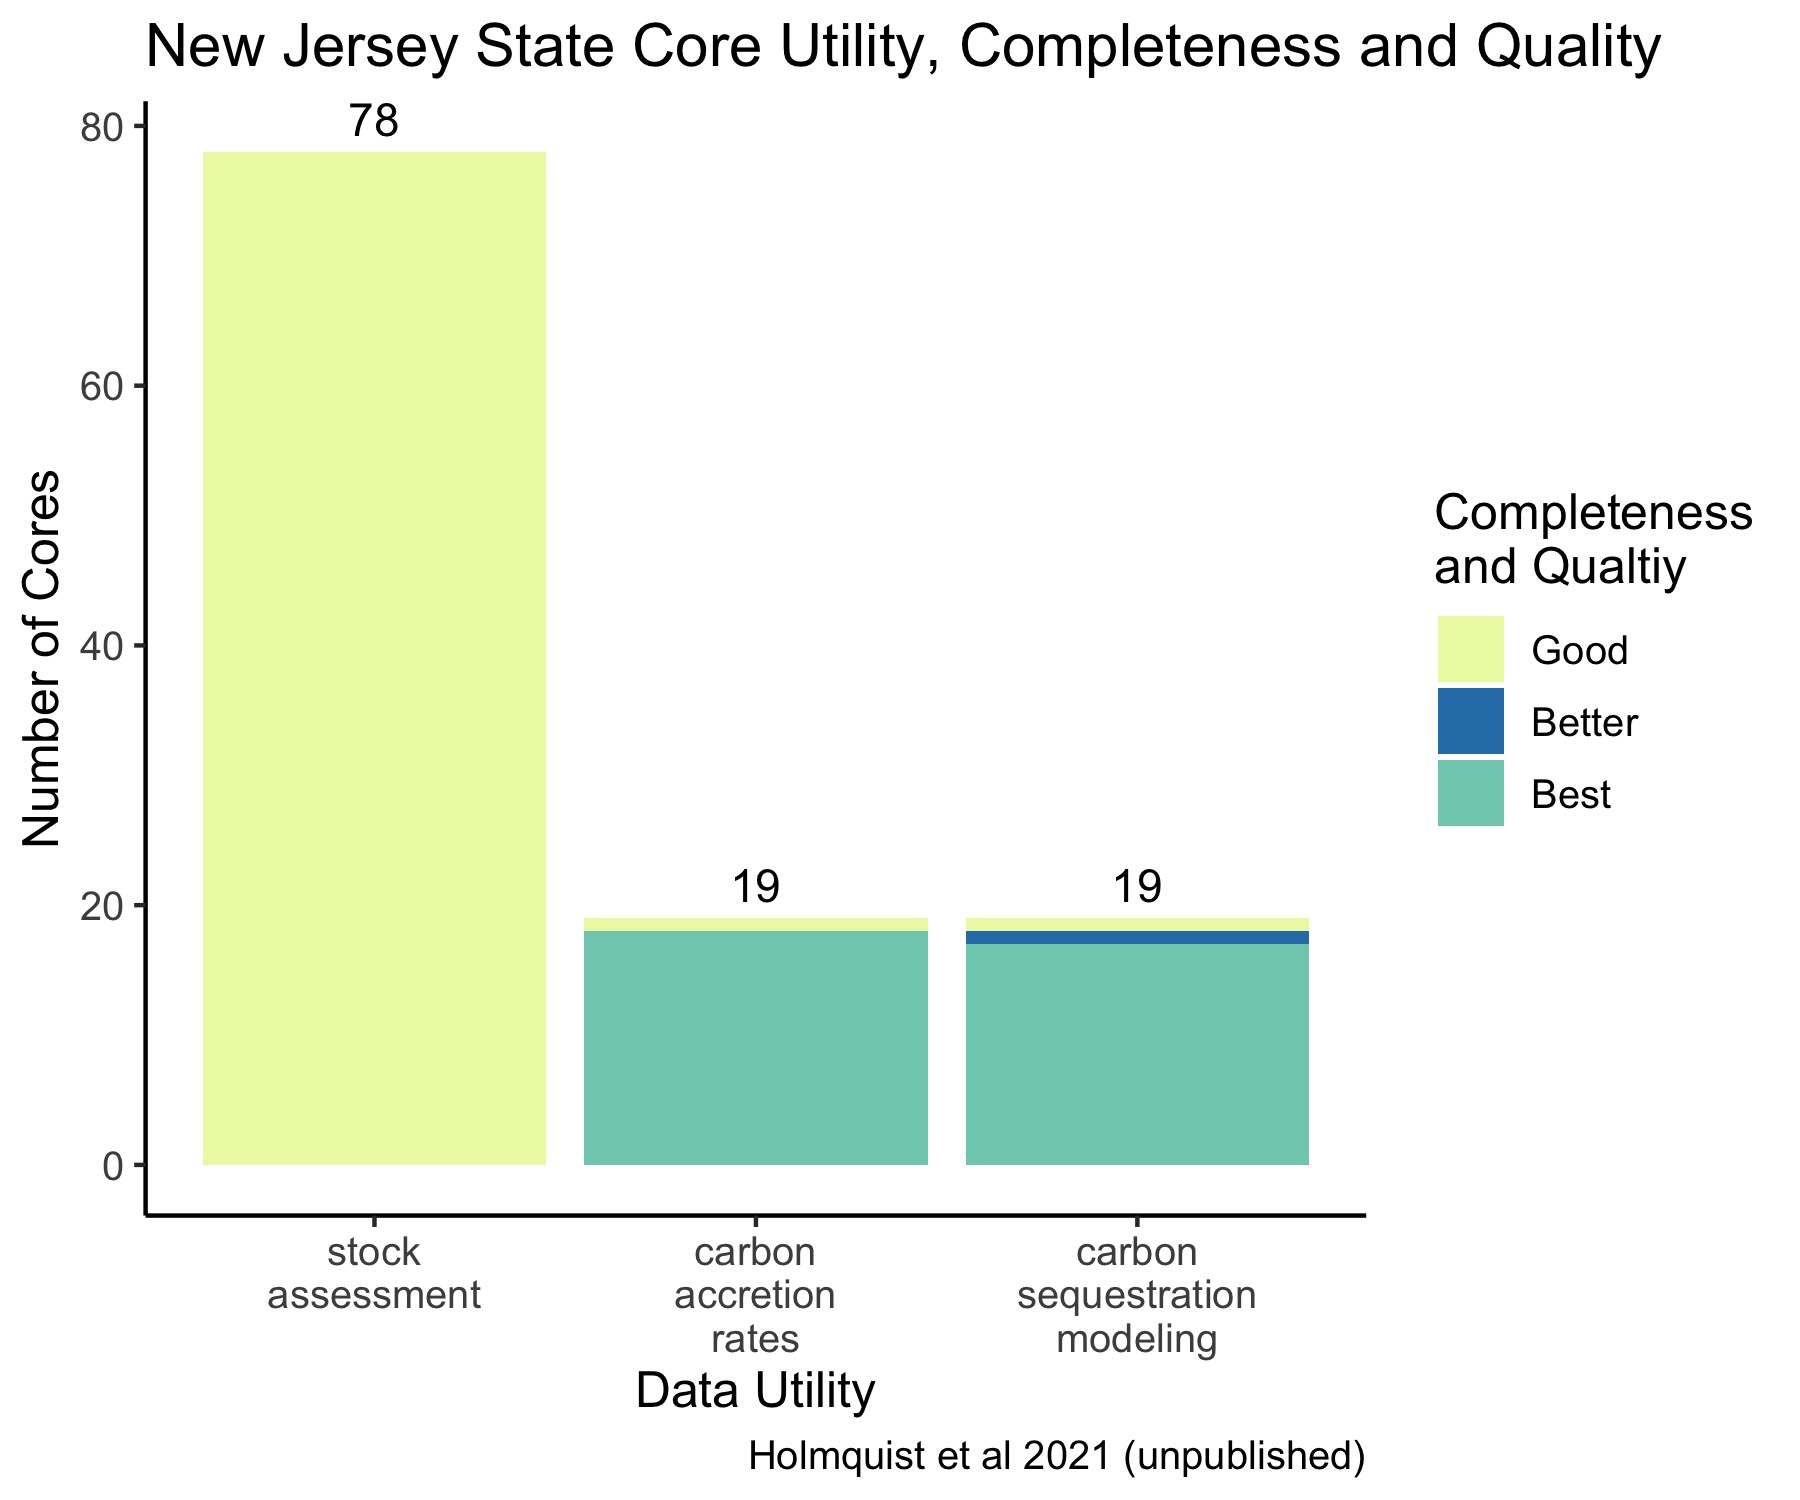 New Jersey State Core Data Utility, Completeness, and Quality.